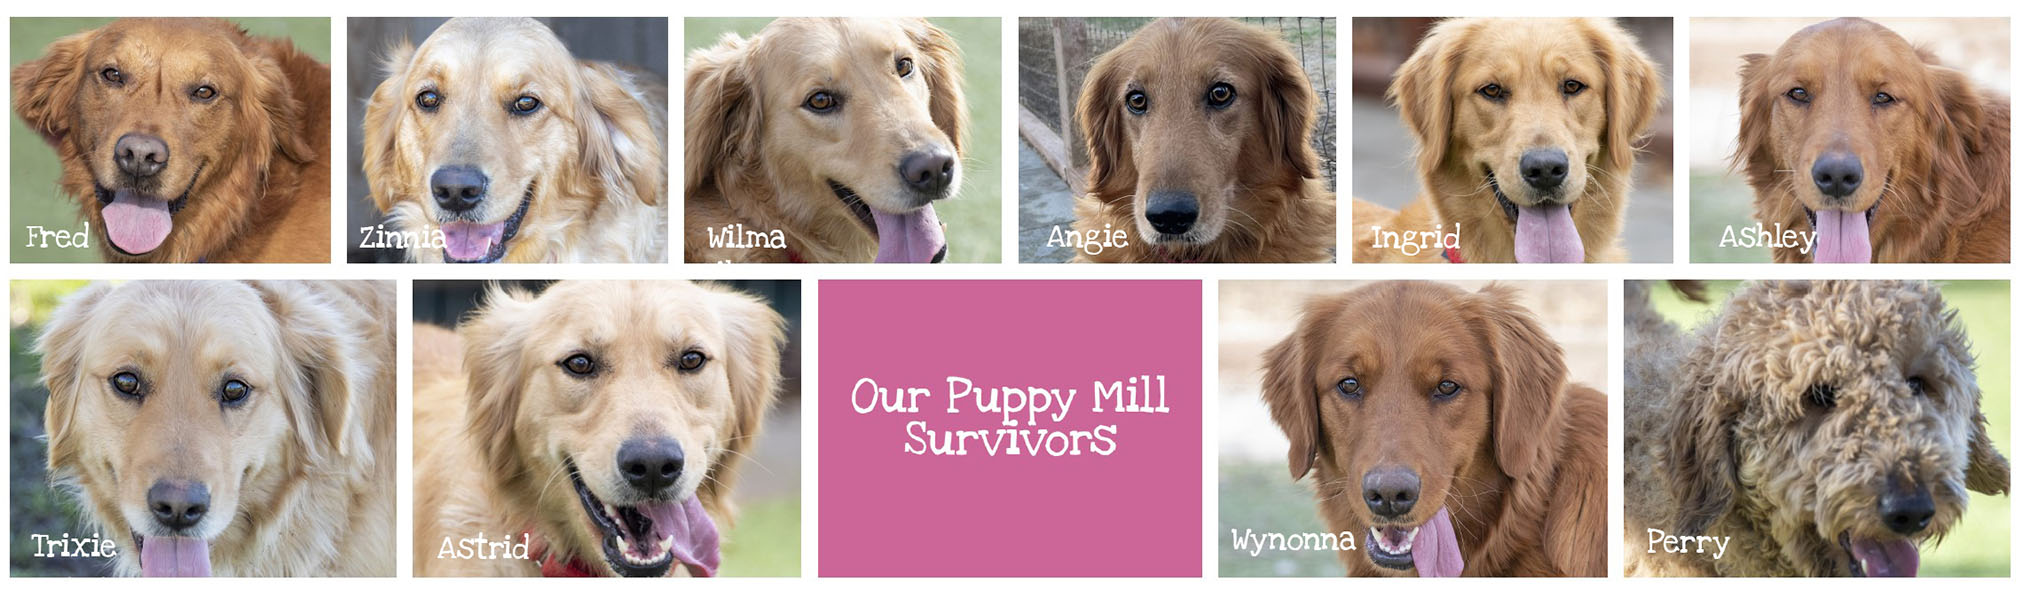 Puppy mill rescued dogs